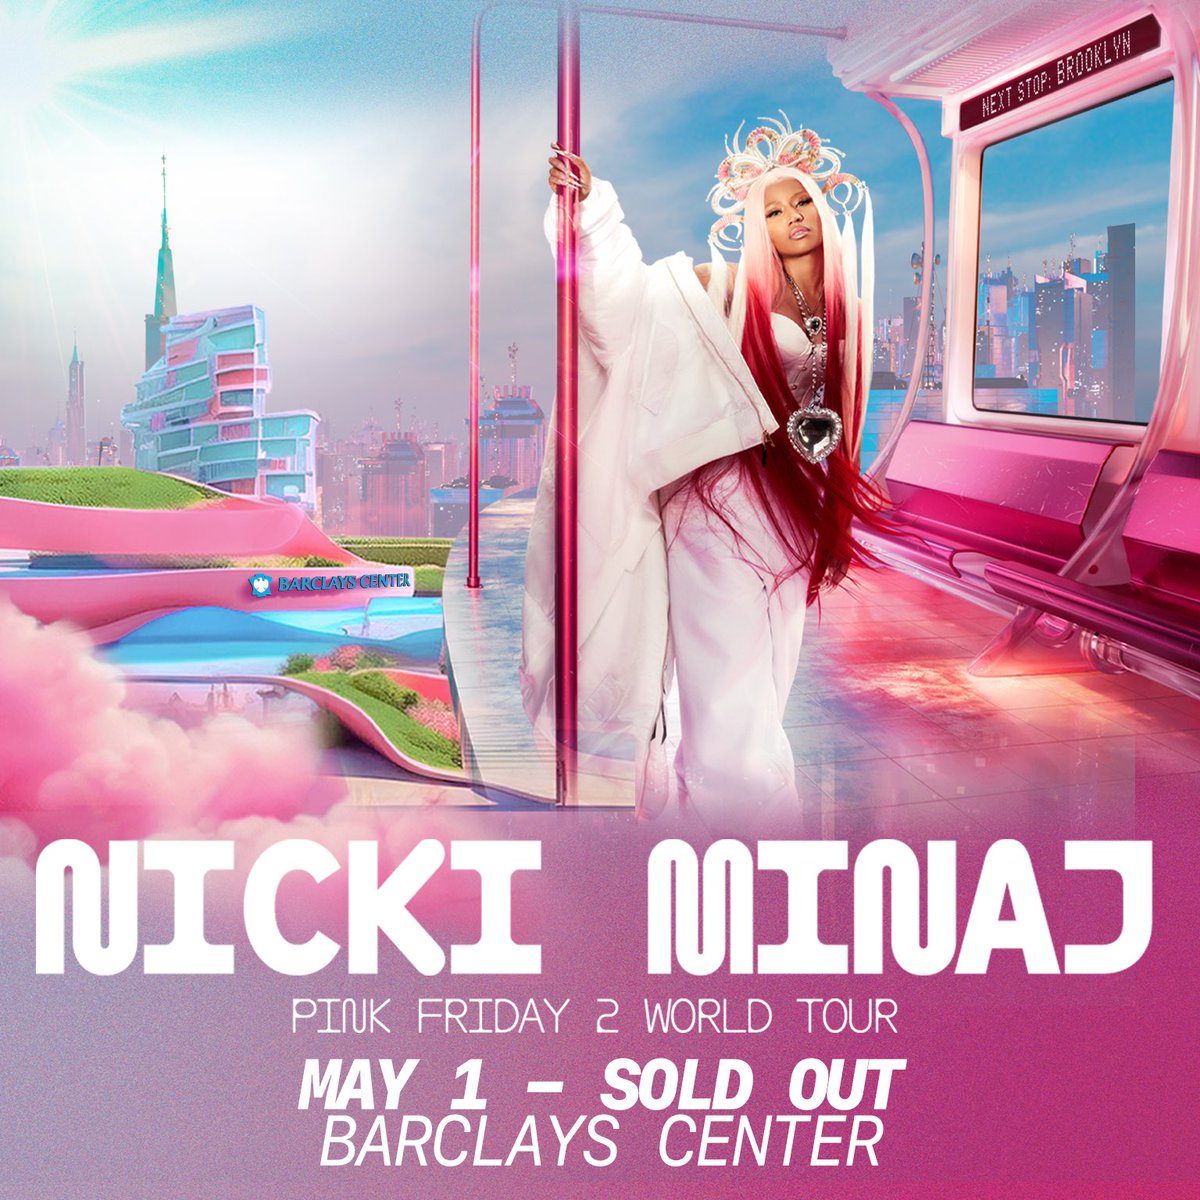 TONIGHT! 𝓣𝓱𝓮 𝓺𝓾𝓮𝓮𝓷 𝓻𝓮𝓽𝓾𝓻𝓷𝓼 𝓽𝓸 𝓑𝓻𝓸𝓸𝓴𝓵𝔂𝓷 @nickiminaj 𝙎𝙊𝙇𝘿 𝙊𝙐𝙏

Doors: 7PM
 
Nicki Minaj merch, including Pink Friday Nails, will be available for early purchase at 4-7PM at the plaza at Barclays Center outside the Main Atrium entrance. No ticket